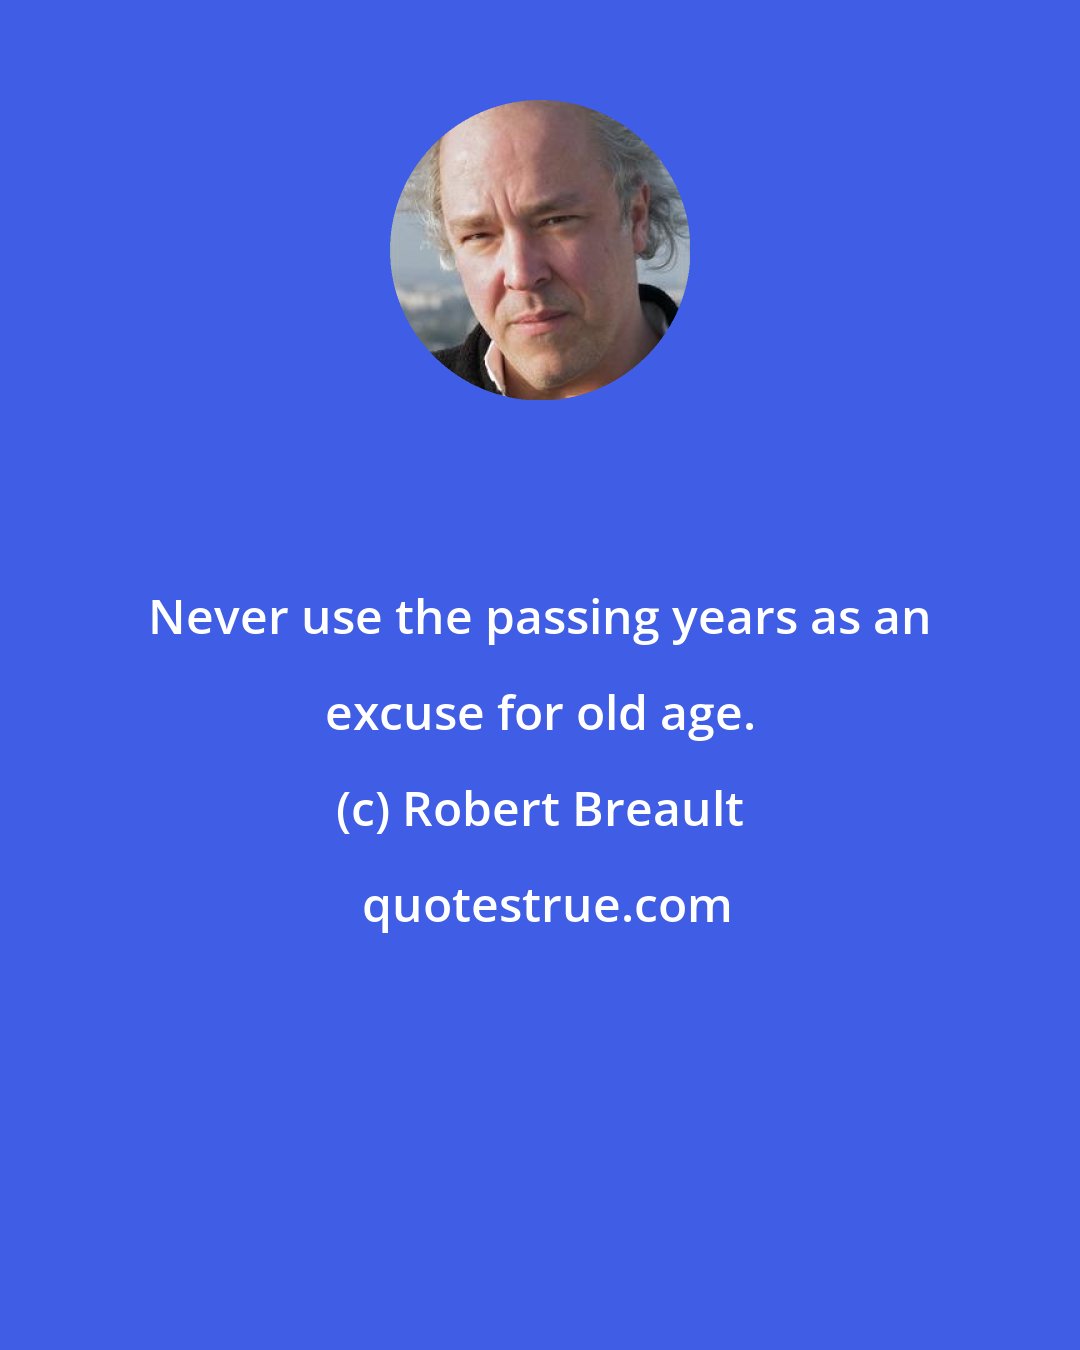 Robert Breault: Never use the passing years as an excuse for old age.